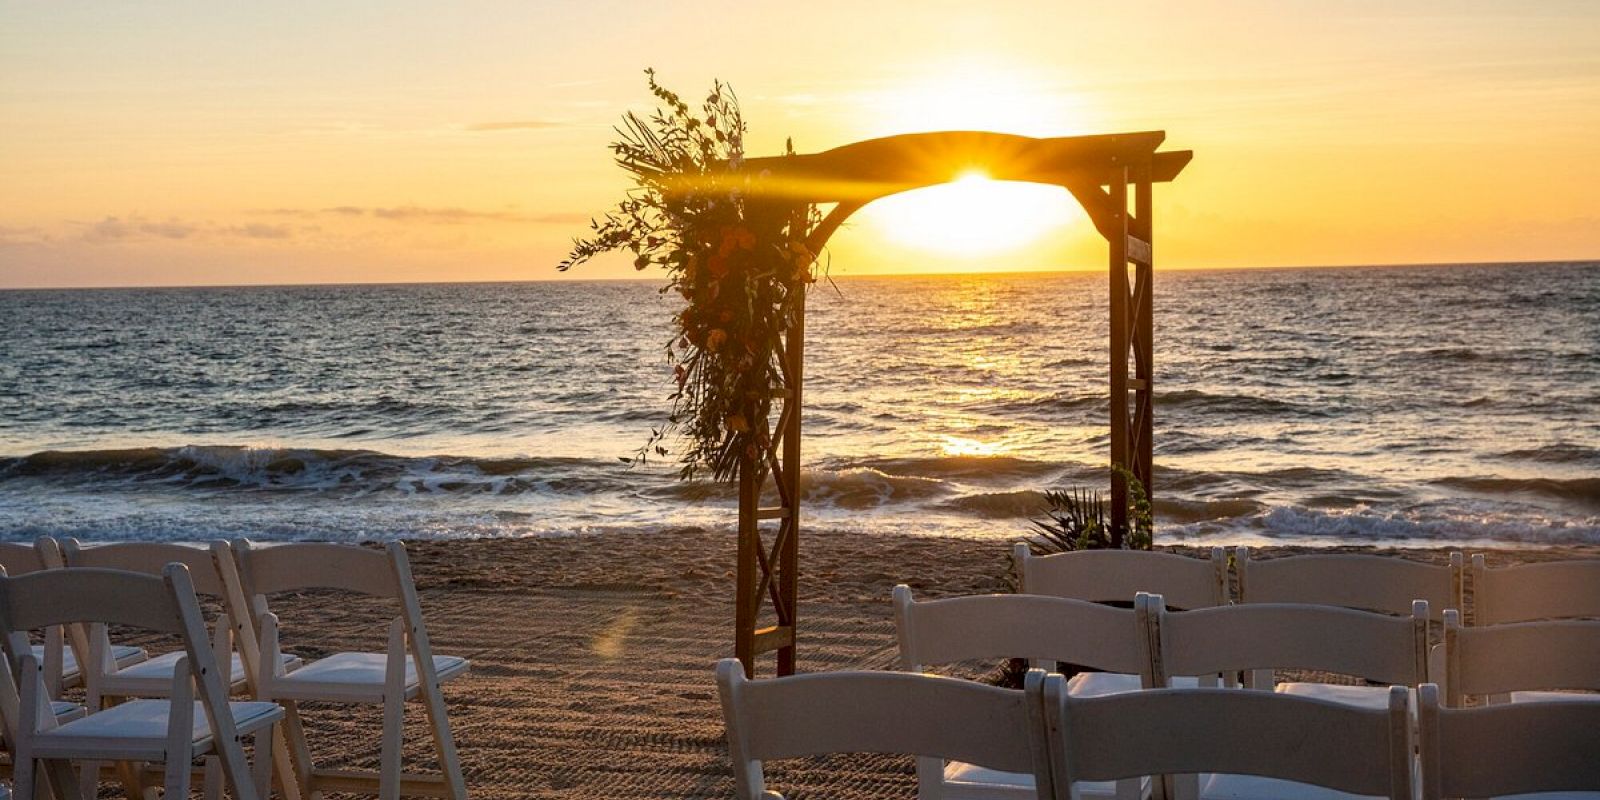 The image shows a beautiful beachside setup for a wedding or event, with a decorated archway and rows of chairs facing the ocean at sunset.